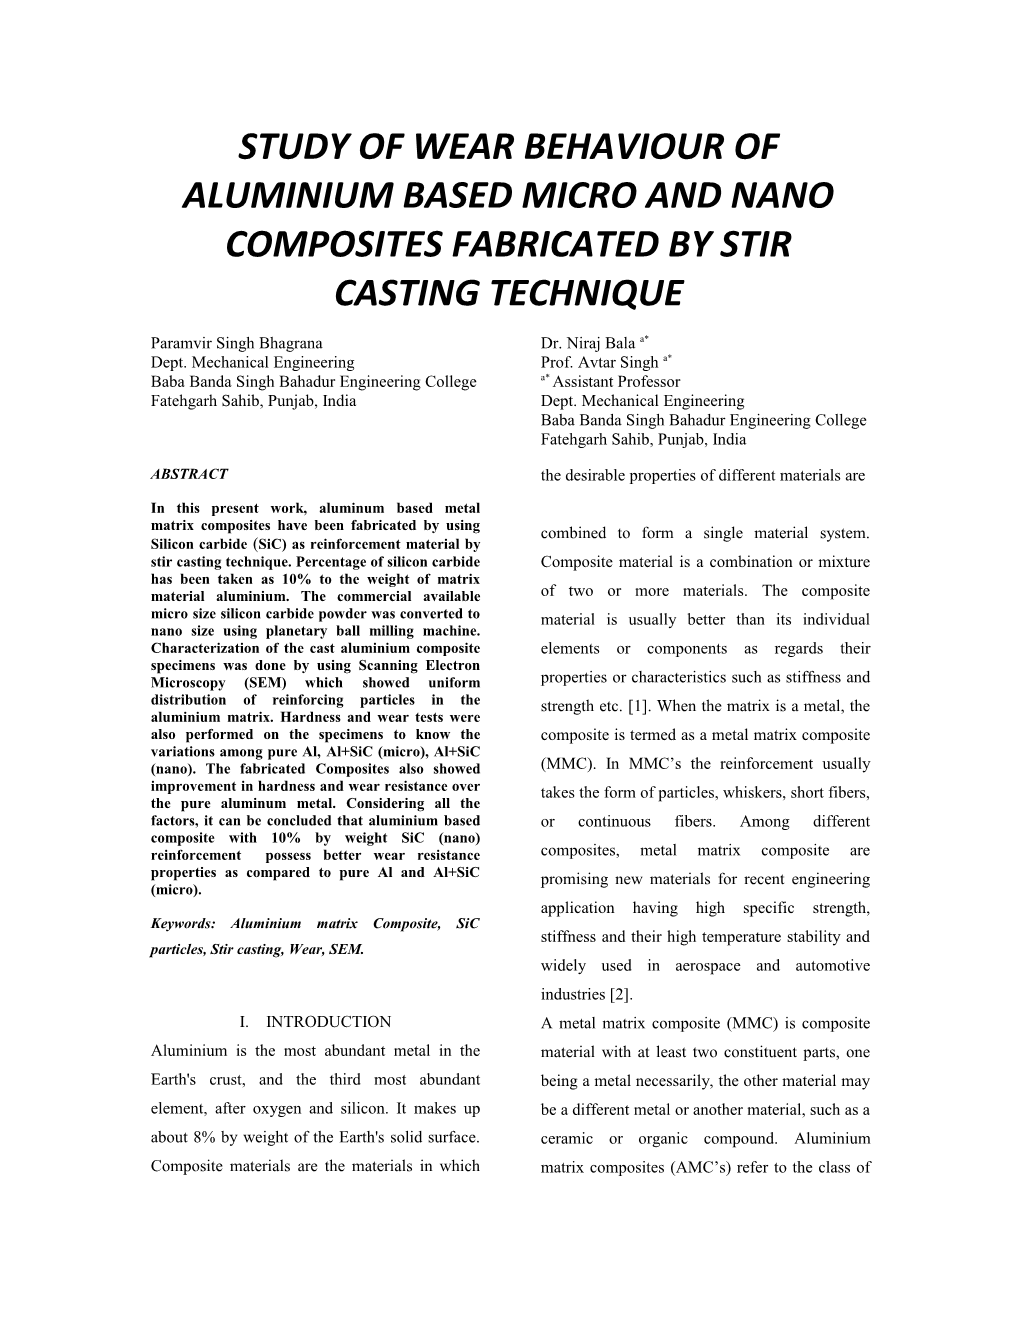 Study of Wear Behaviour of Aluminium Based Micro and Nano Composites Fabricated by Stir